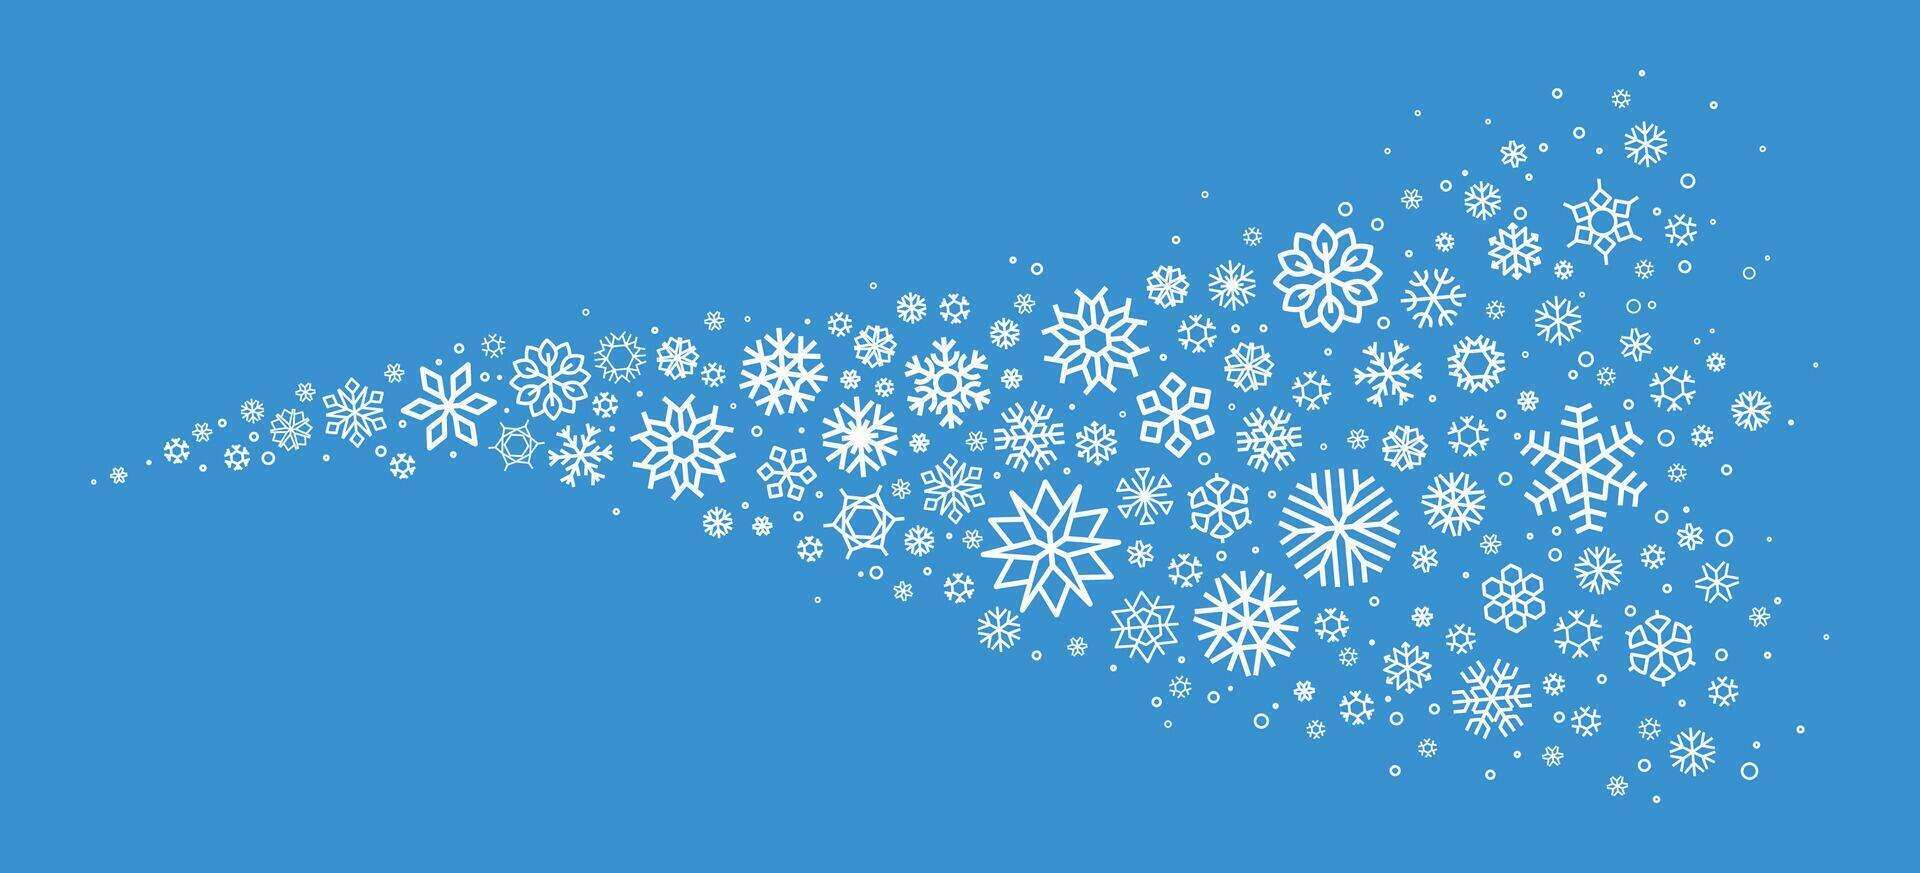 Snowflake wave. Falling snowflakes Christmas New Year celebration concept, snowy winter blizzard decorative elements. Vector snowfall banner set